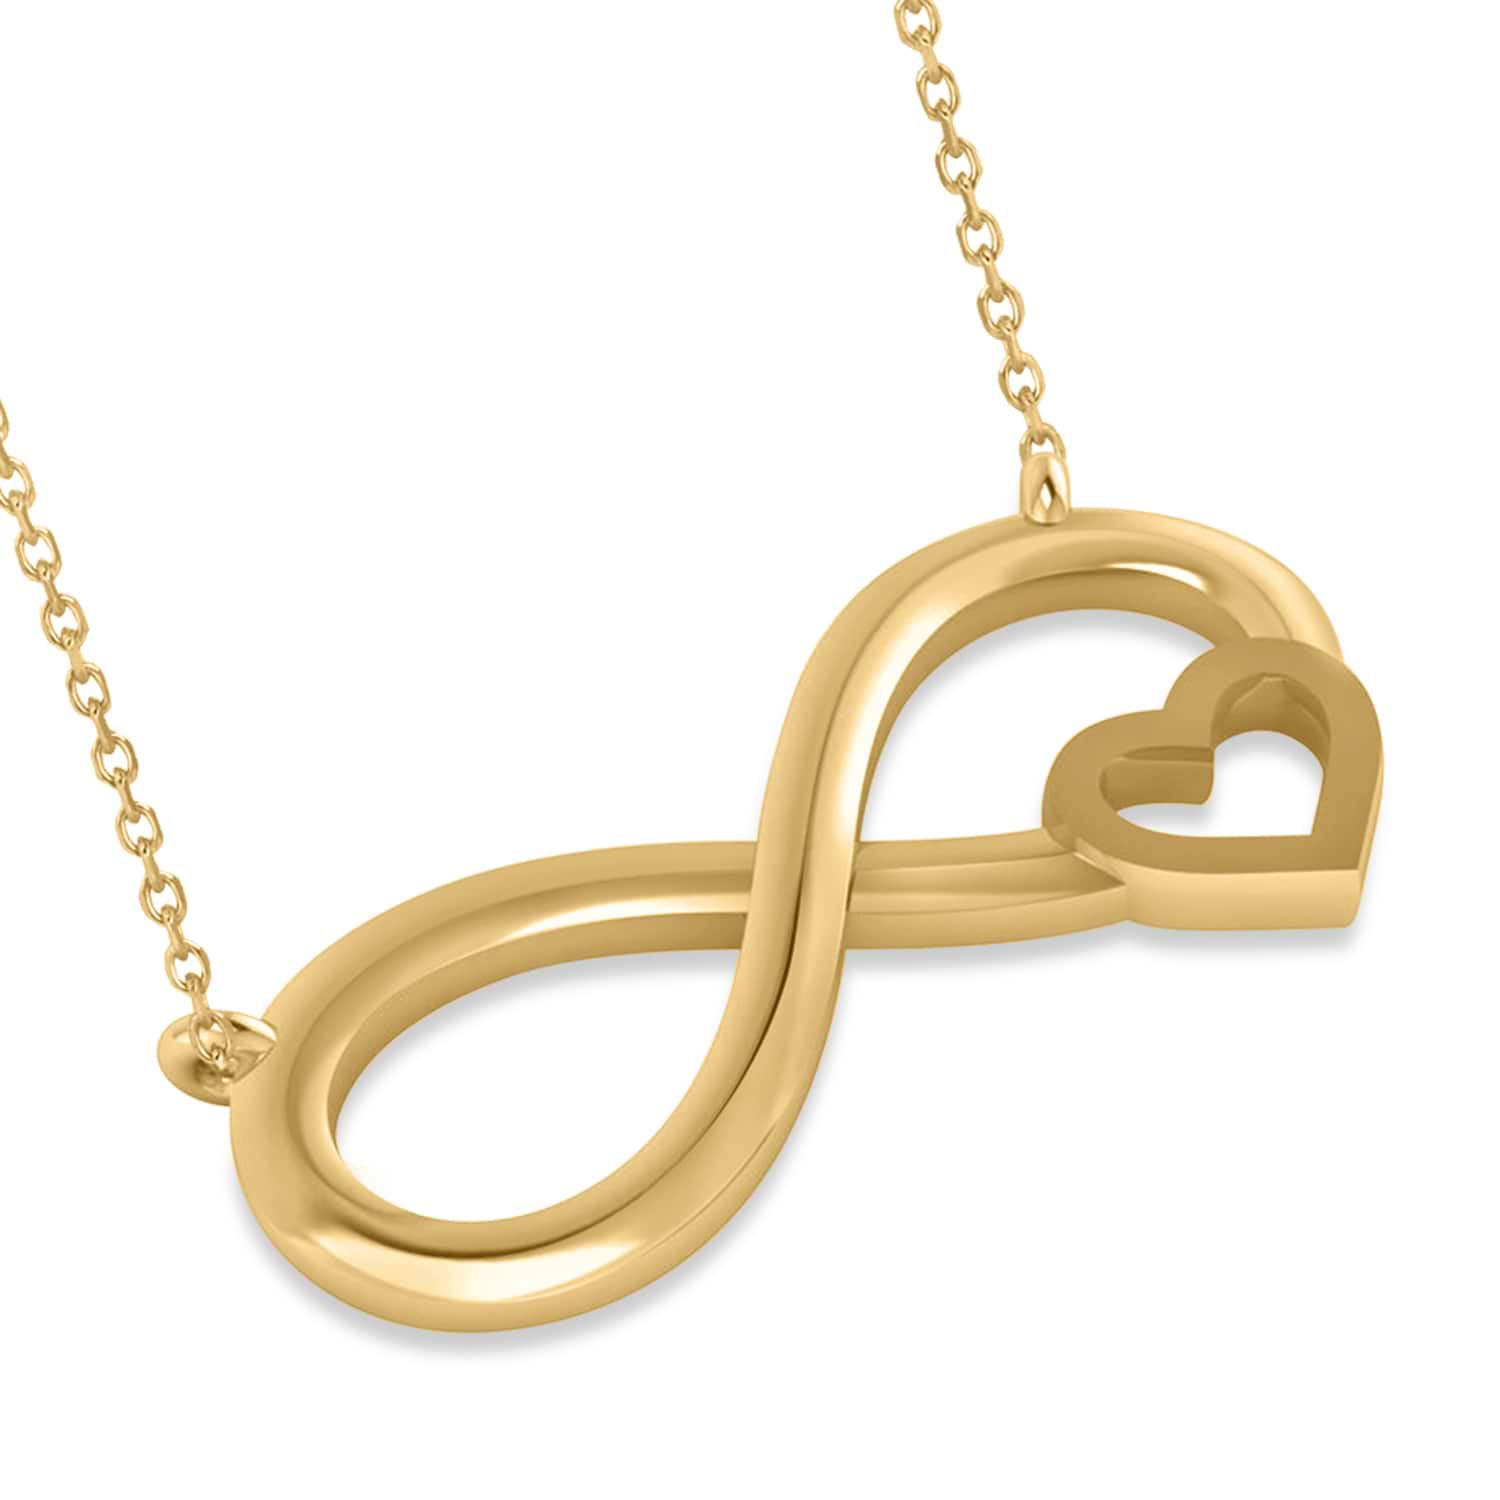 Infinity & Heart Pendant Necklace 14k Yellow Gold